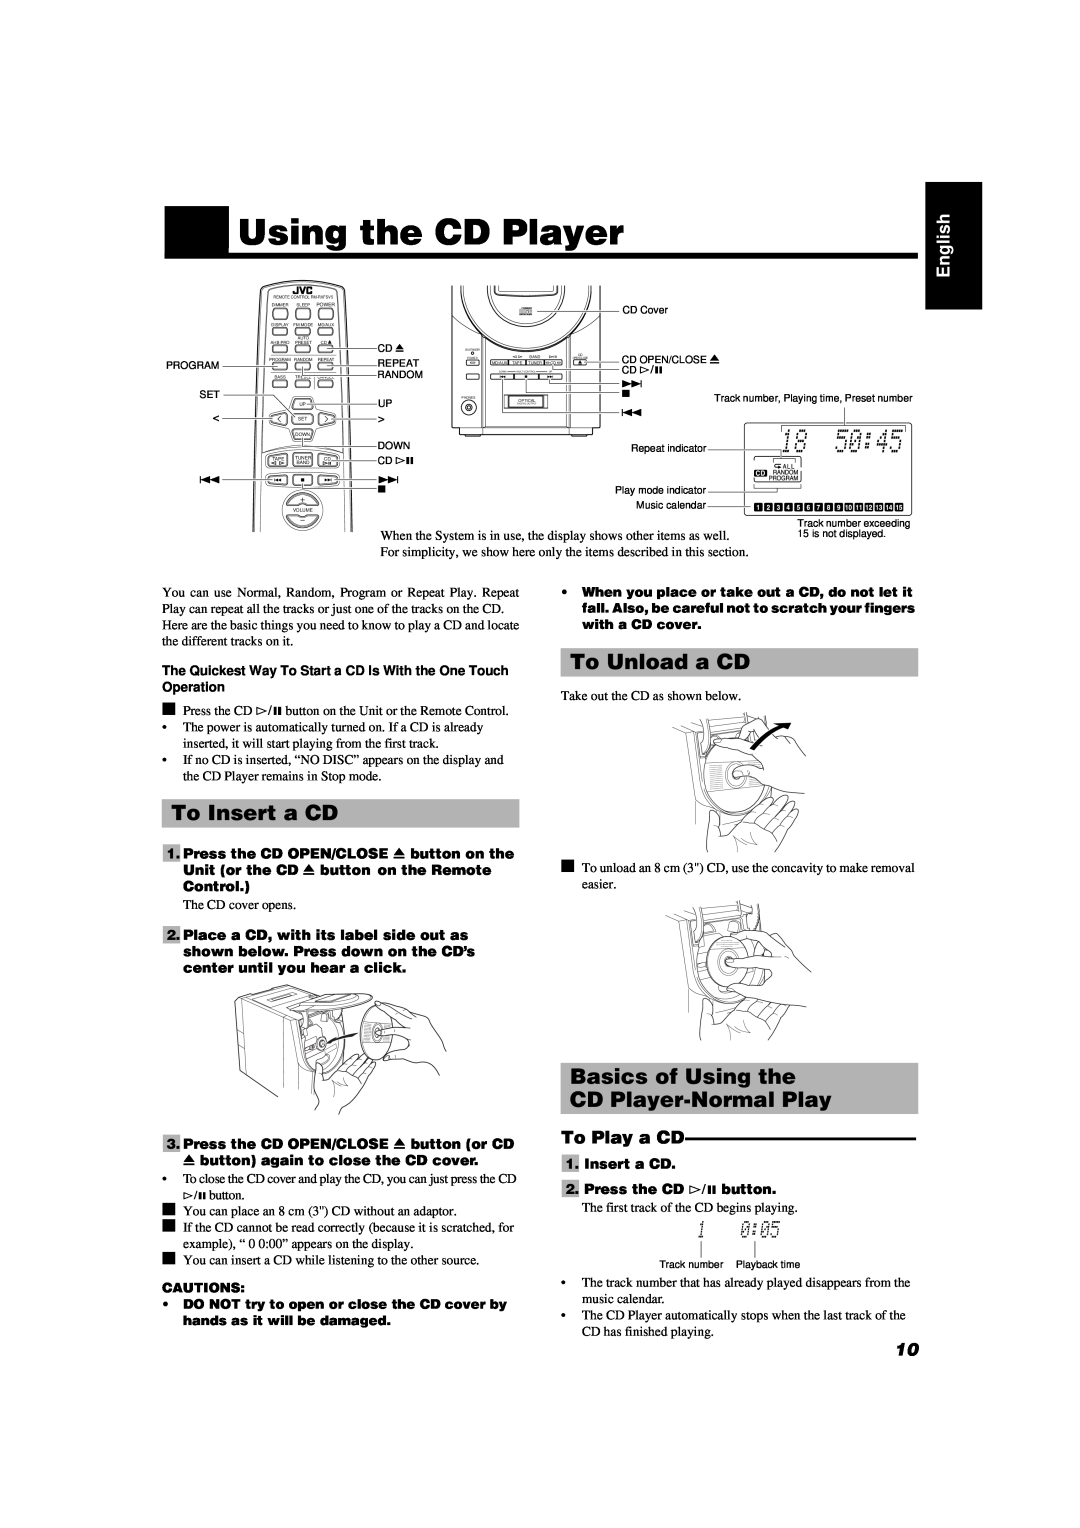 JVC FS-V5 manual To Insert a CD, To Unload a CD, Basics of Using the CD Player-NormalPlay, To Play a CD, Control 